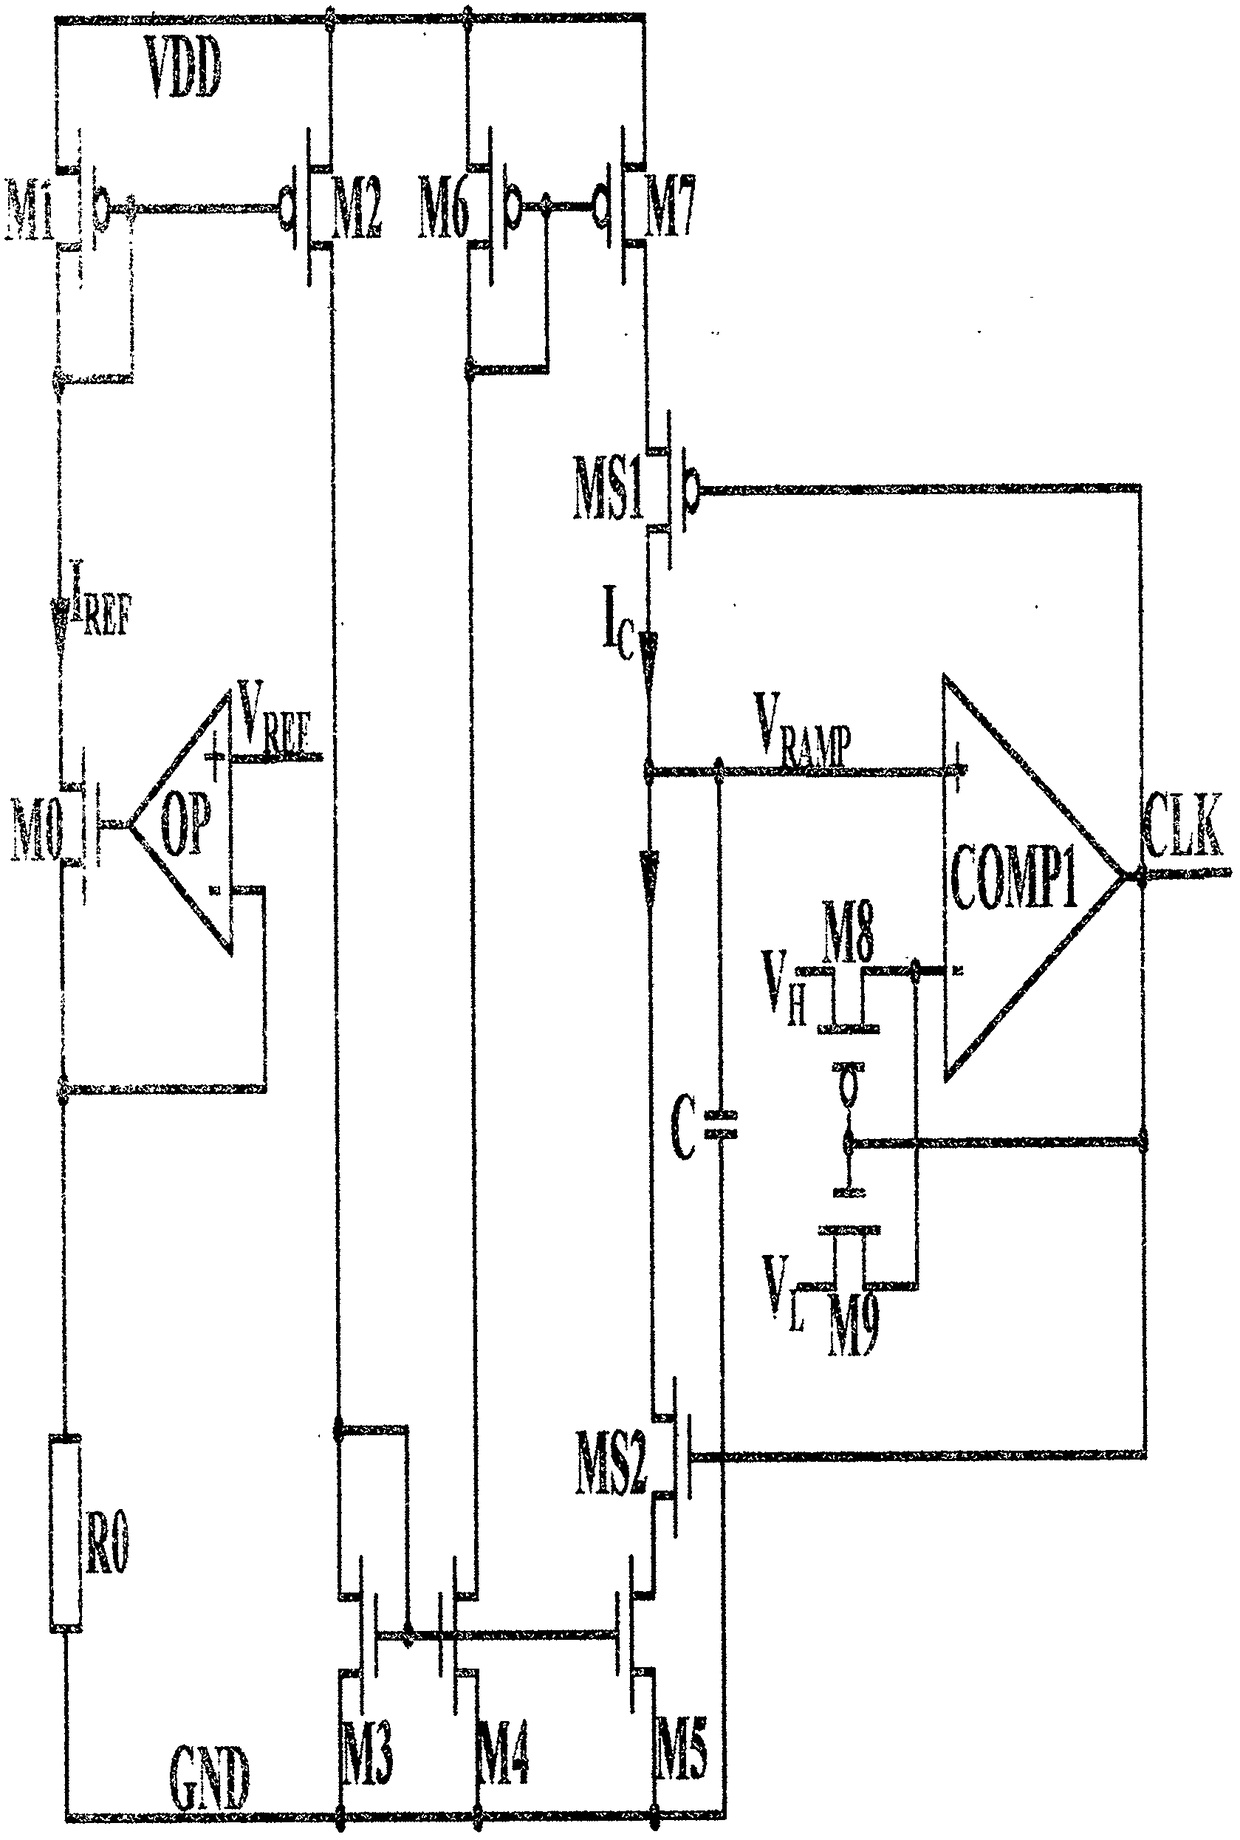 Multi-frequency oscillator with dead time in electronic ballast